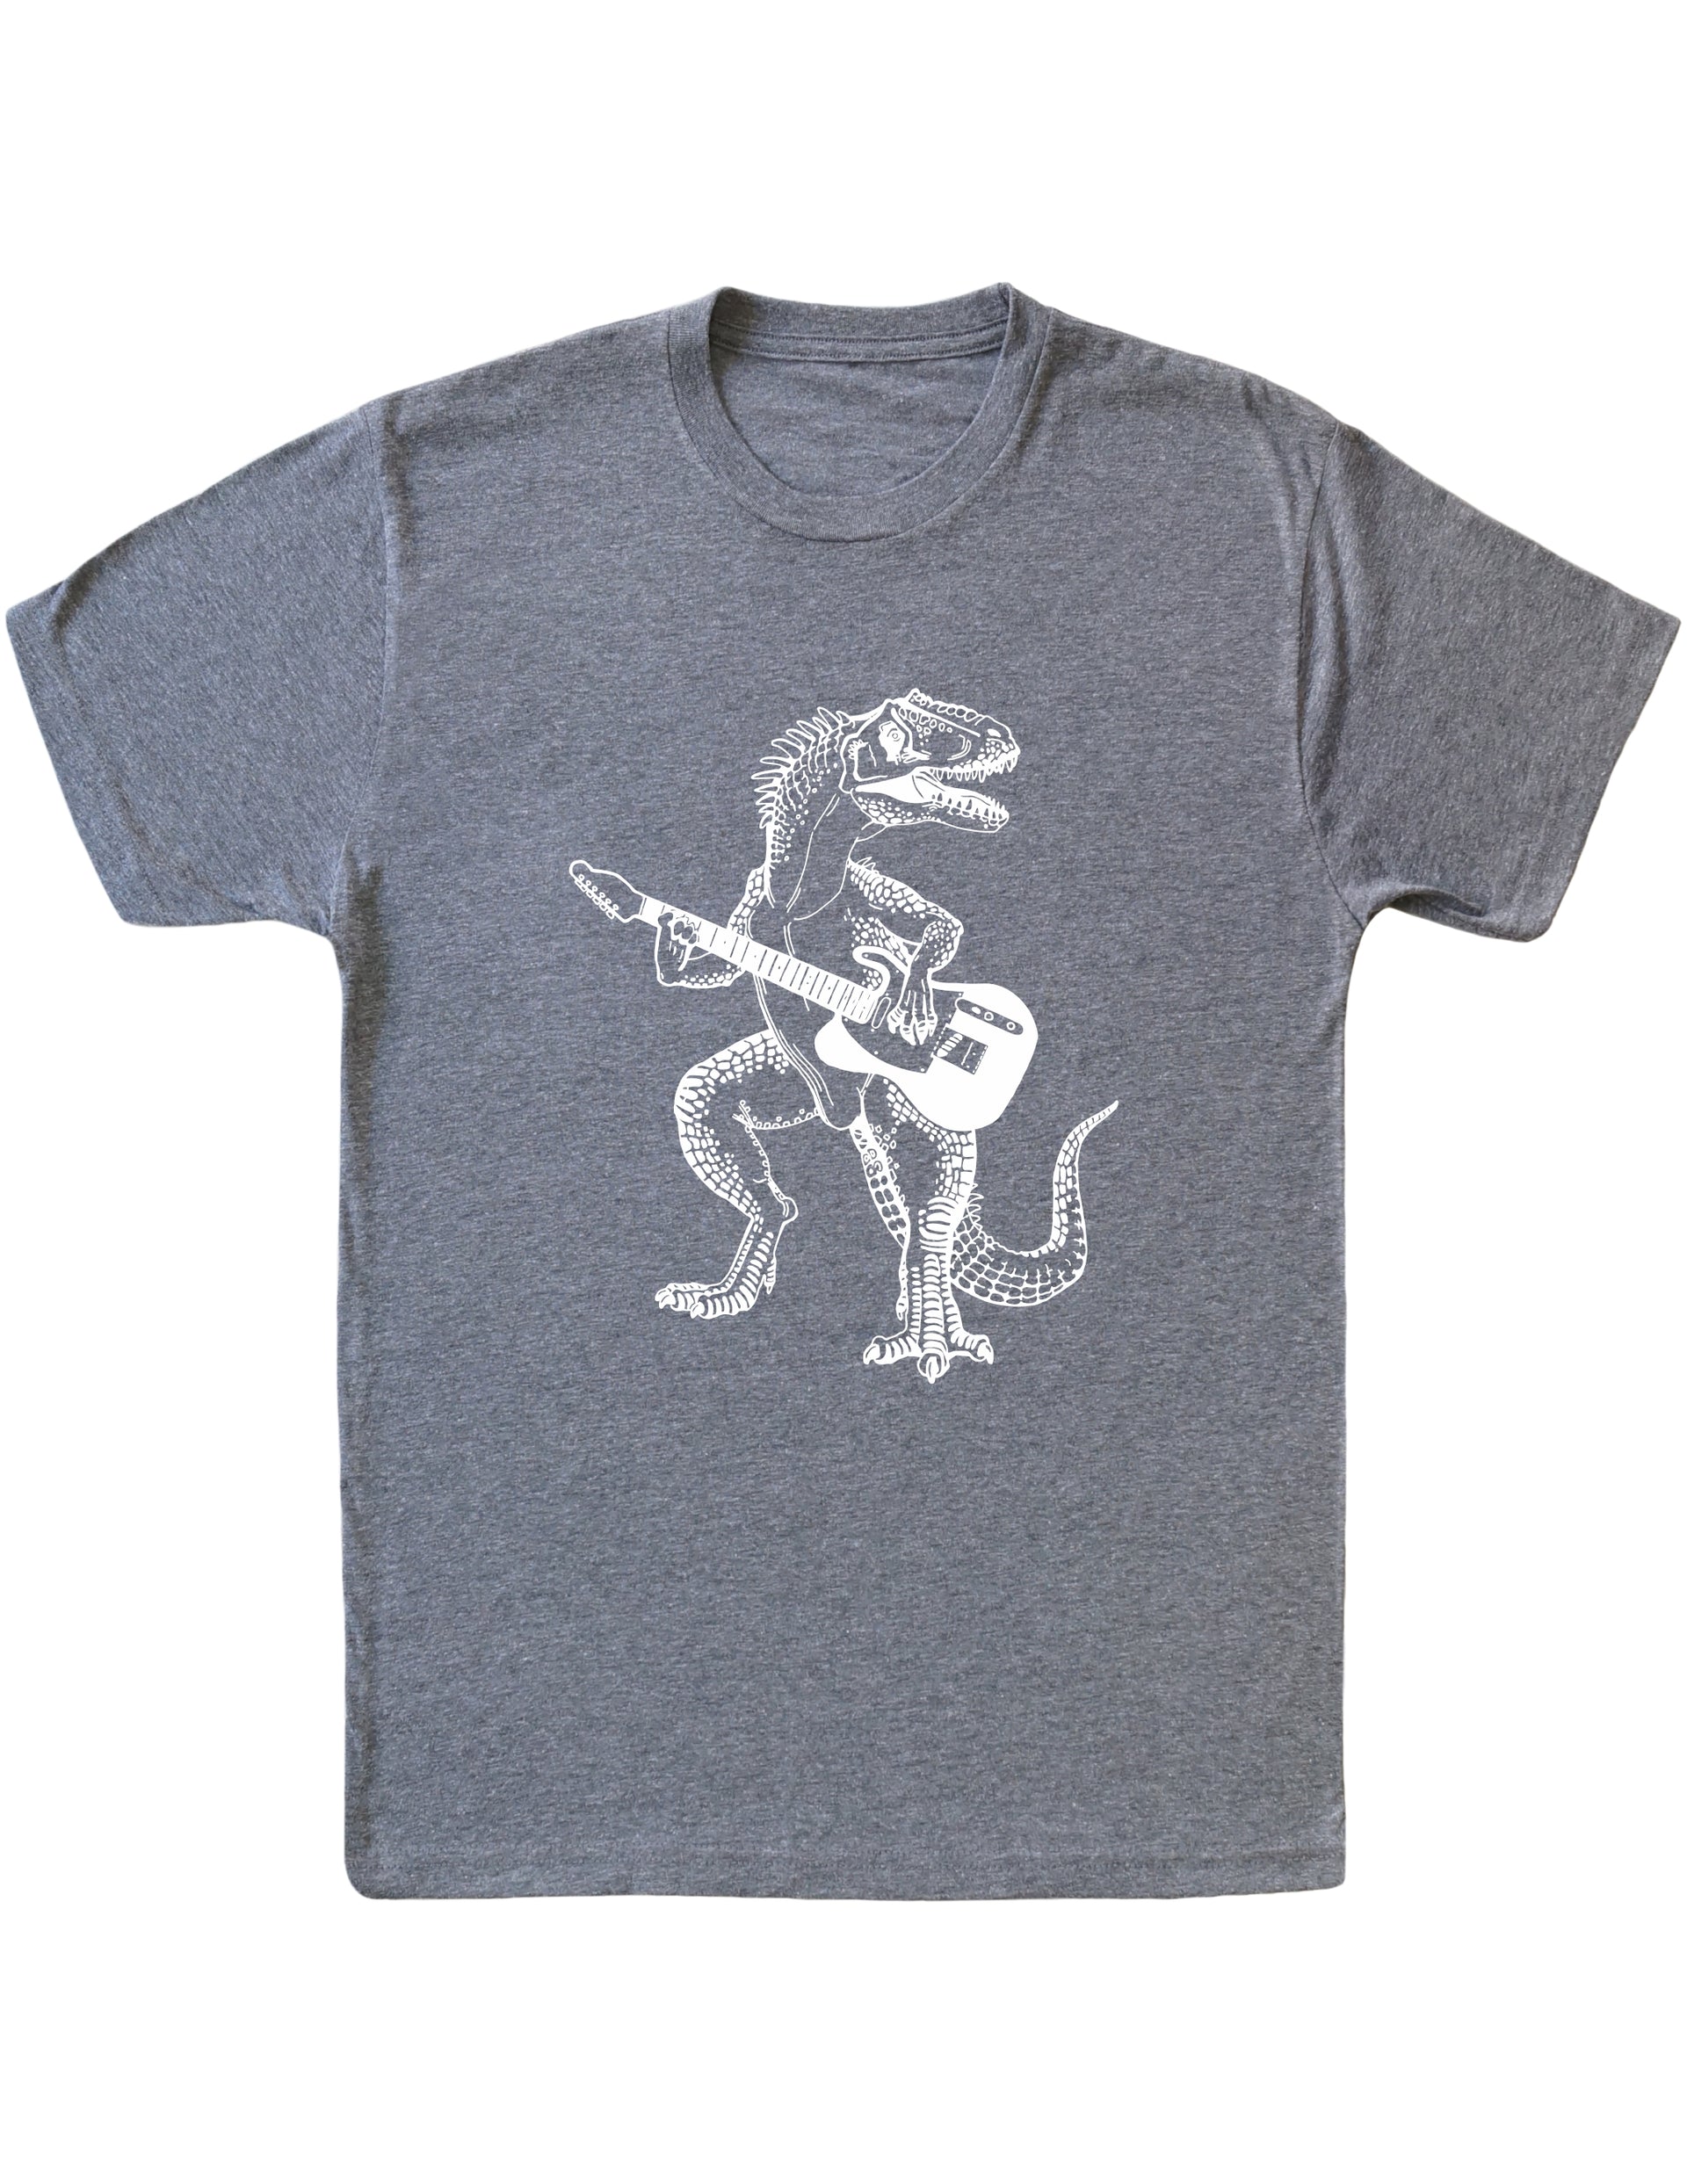 seembo-vintage-grey-t-shirt-with-dinosaur-playing-guitar-guitarist-art-on-it